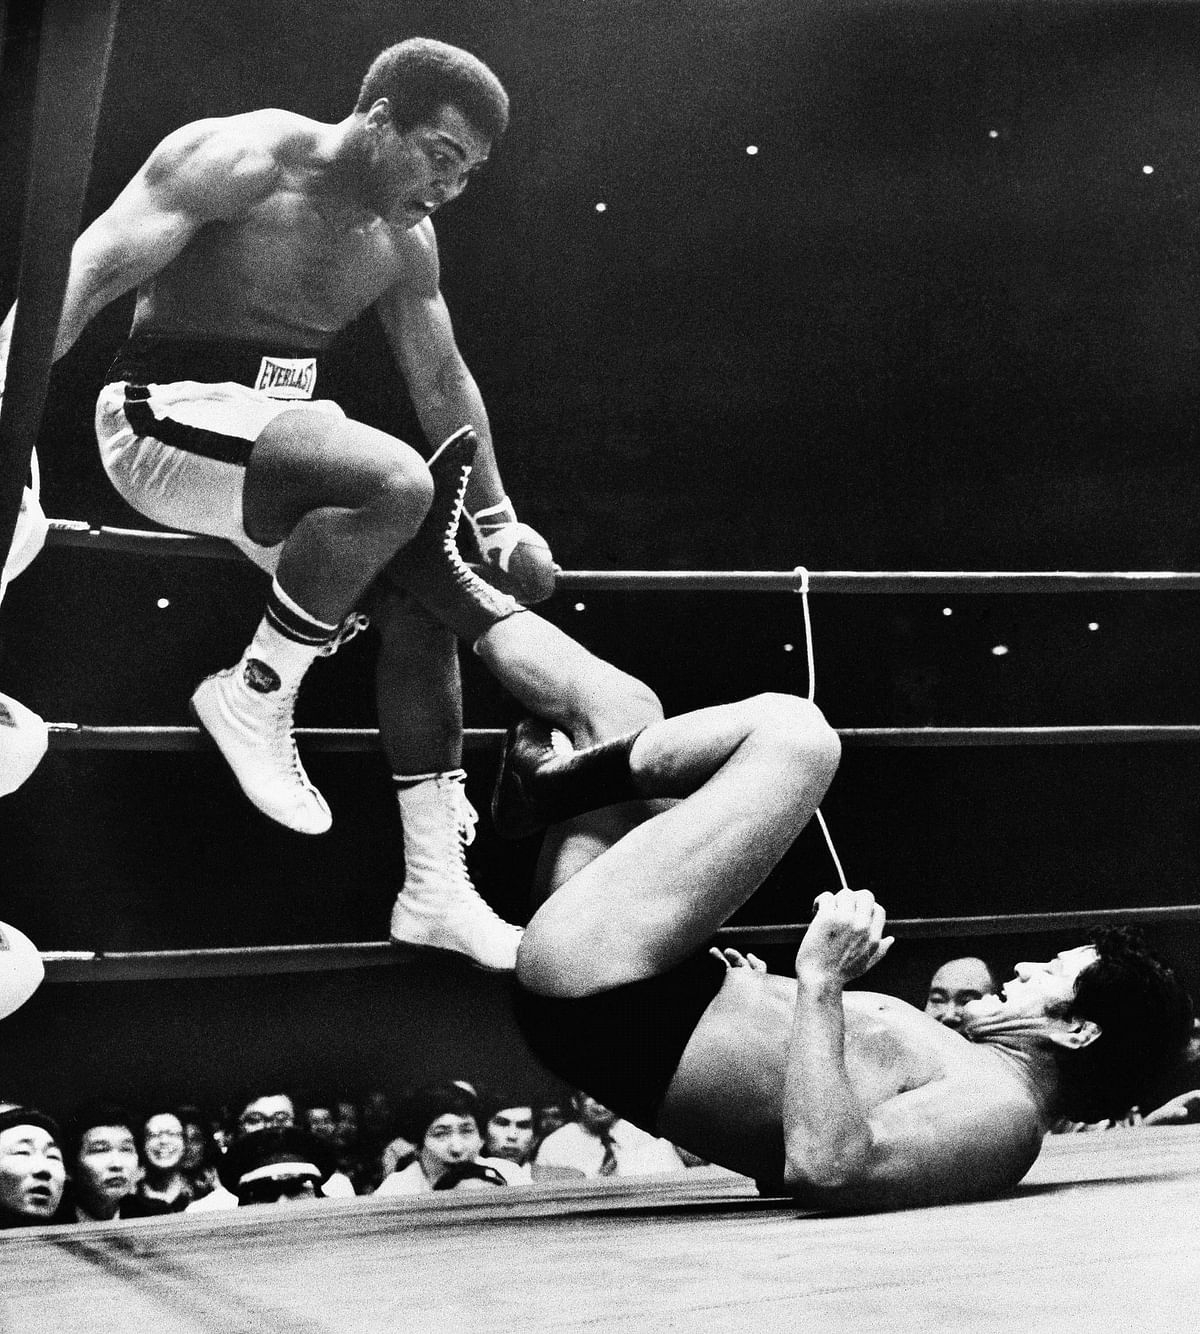 Nicknamed “The Greatest,” Ali retired from boxing in 1981 with a 56-5 record.